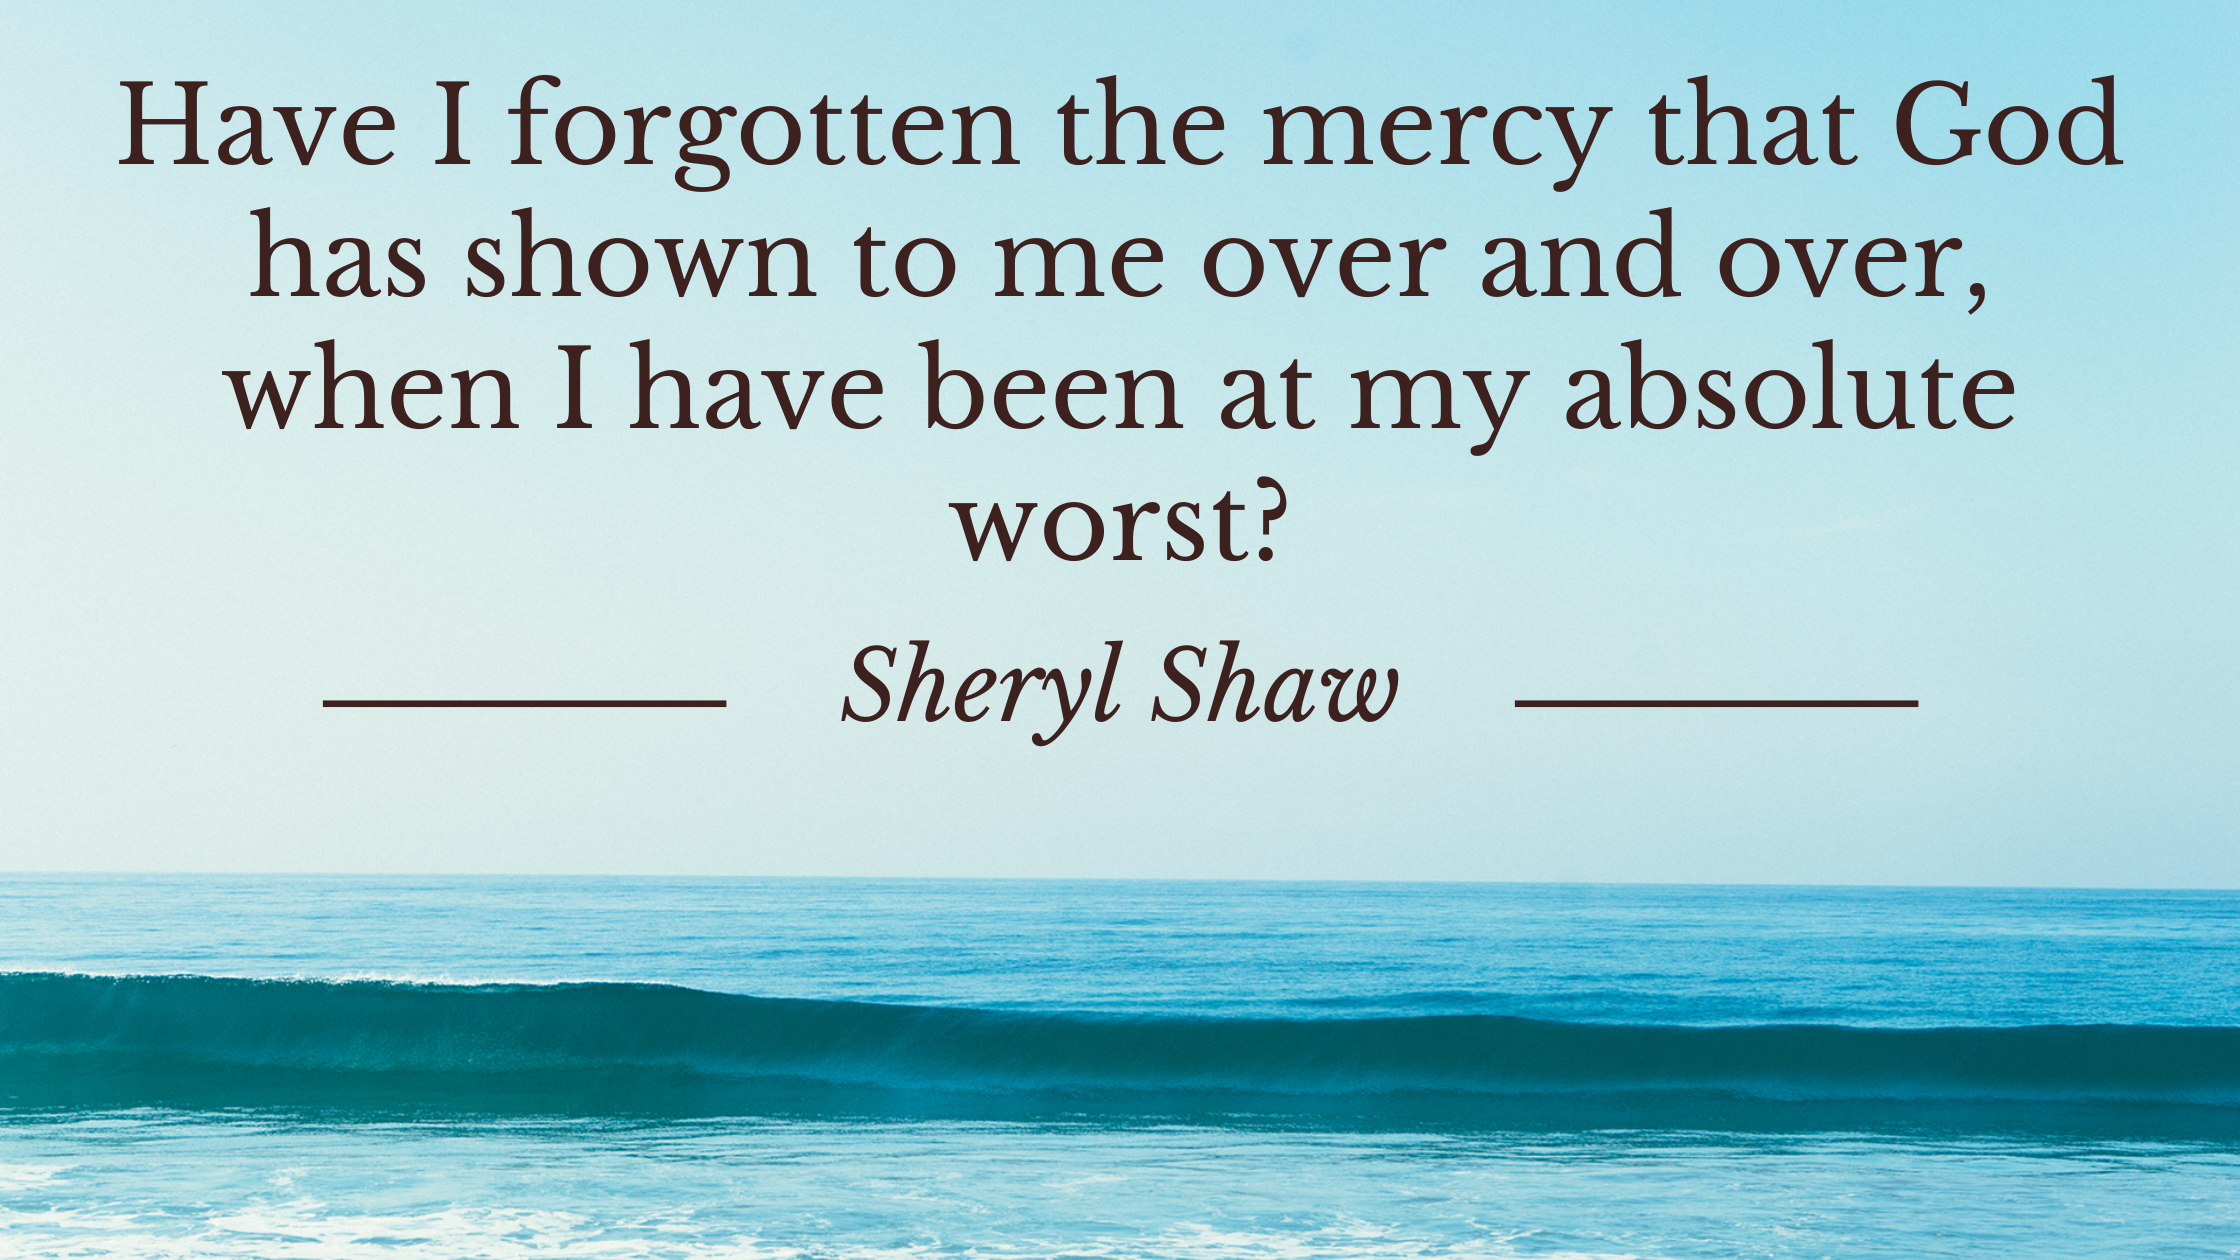 Have I forgotten the mercy that God has shown to me over and over, when I have been at my absolute worst?